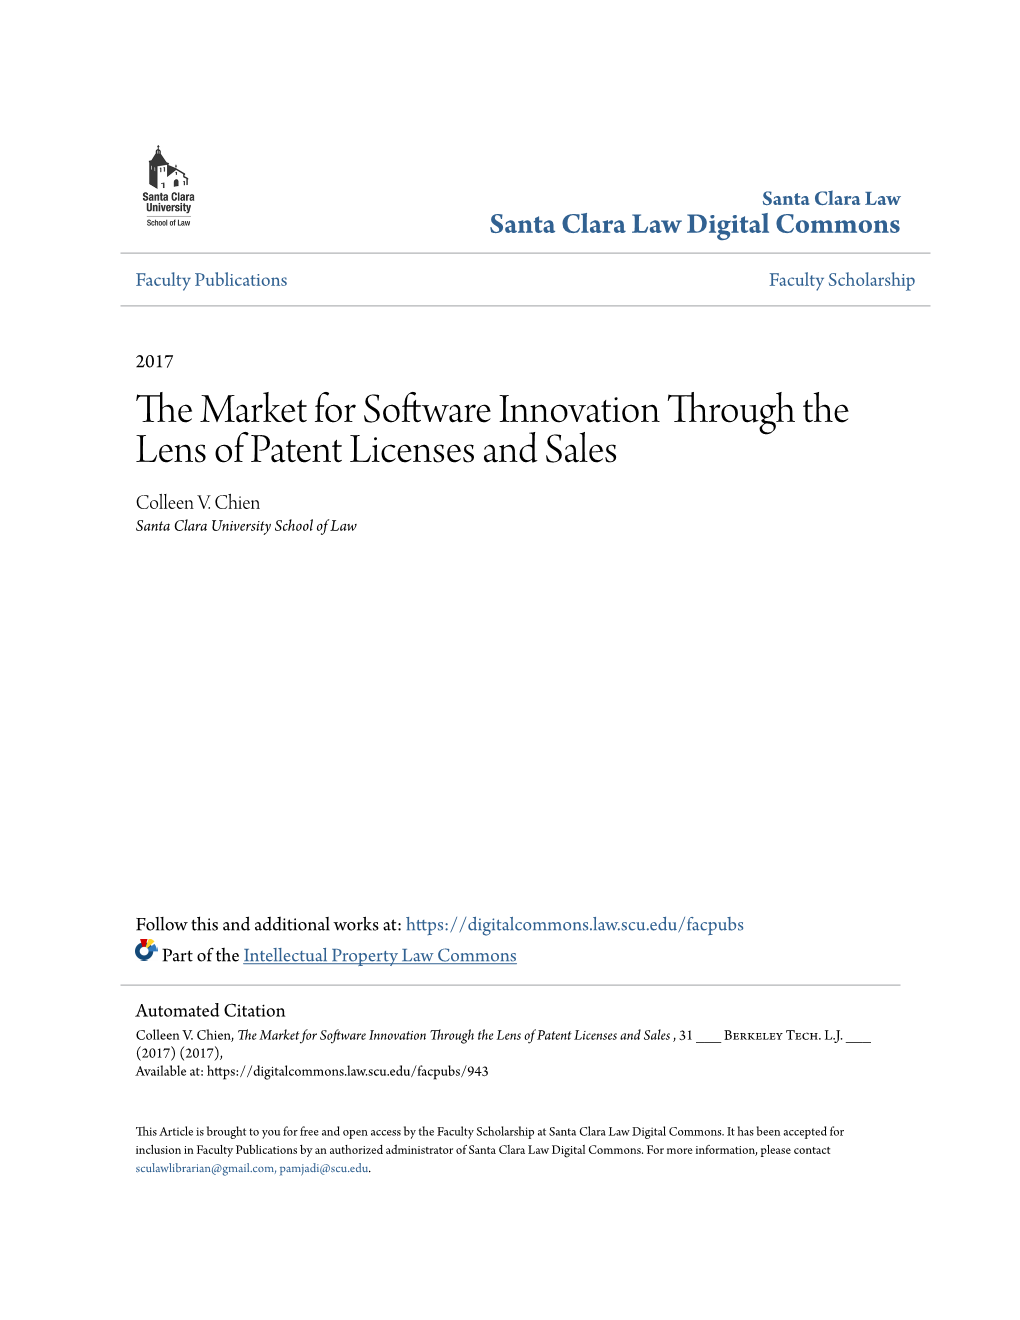 The Market for Software Innovation Through the Lens of Patent Licenses and Sales , 31 ___ Berkeley Tech